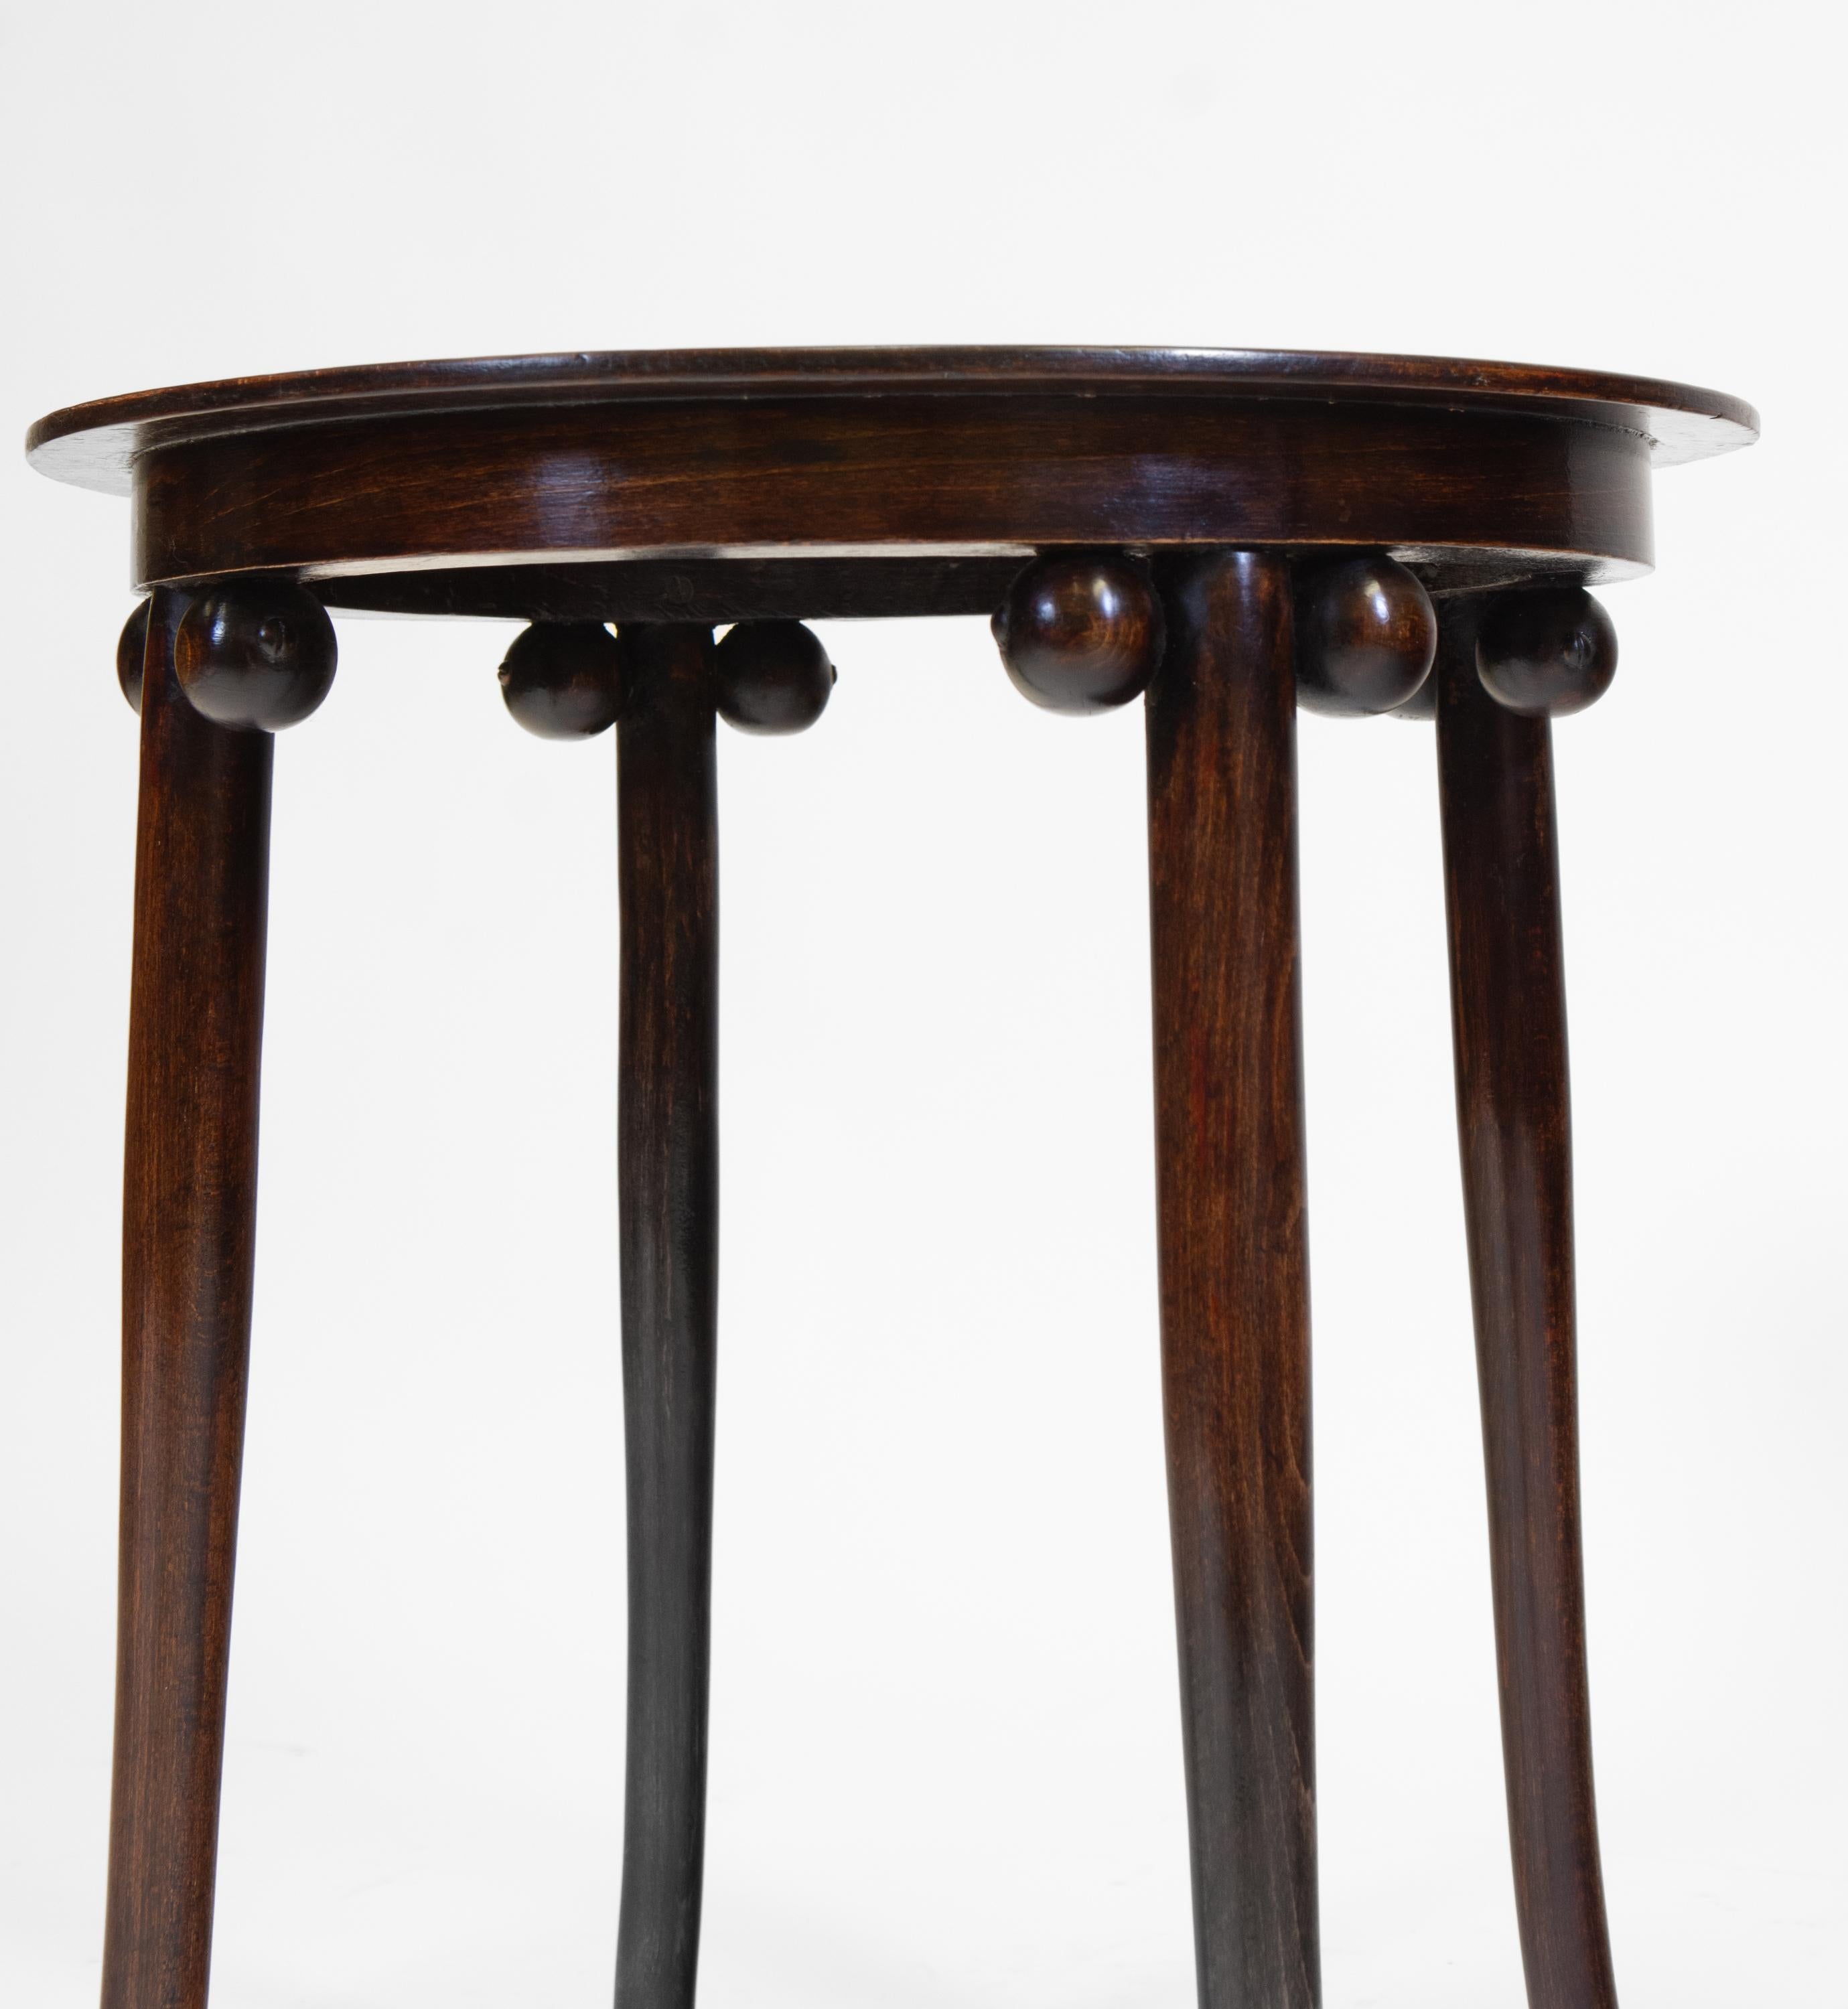 A Secessionist bentwood side table in the manner of Josef Hoffmann. Circa 1900.

Circular top above four slender legs, flanked by sphere mounts. There is a stamp mark to the underside, please refer to the the last photograph.

The table is in very